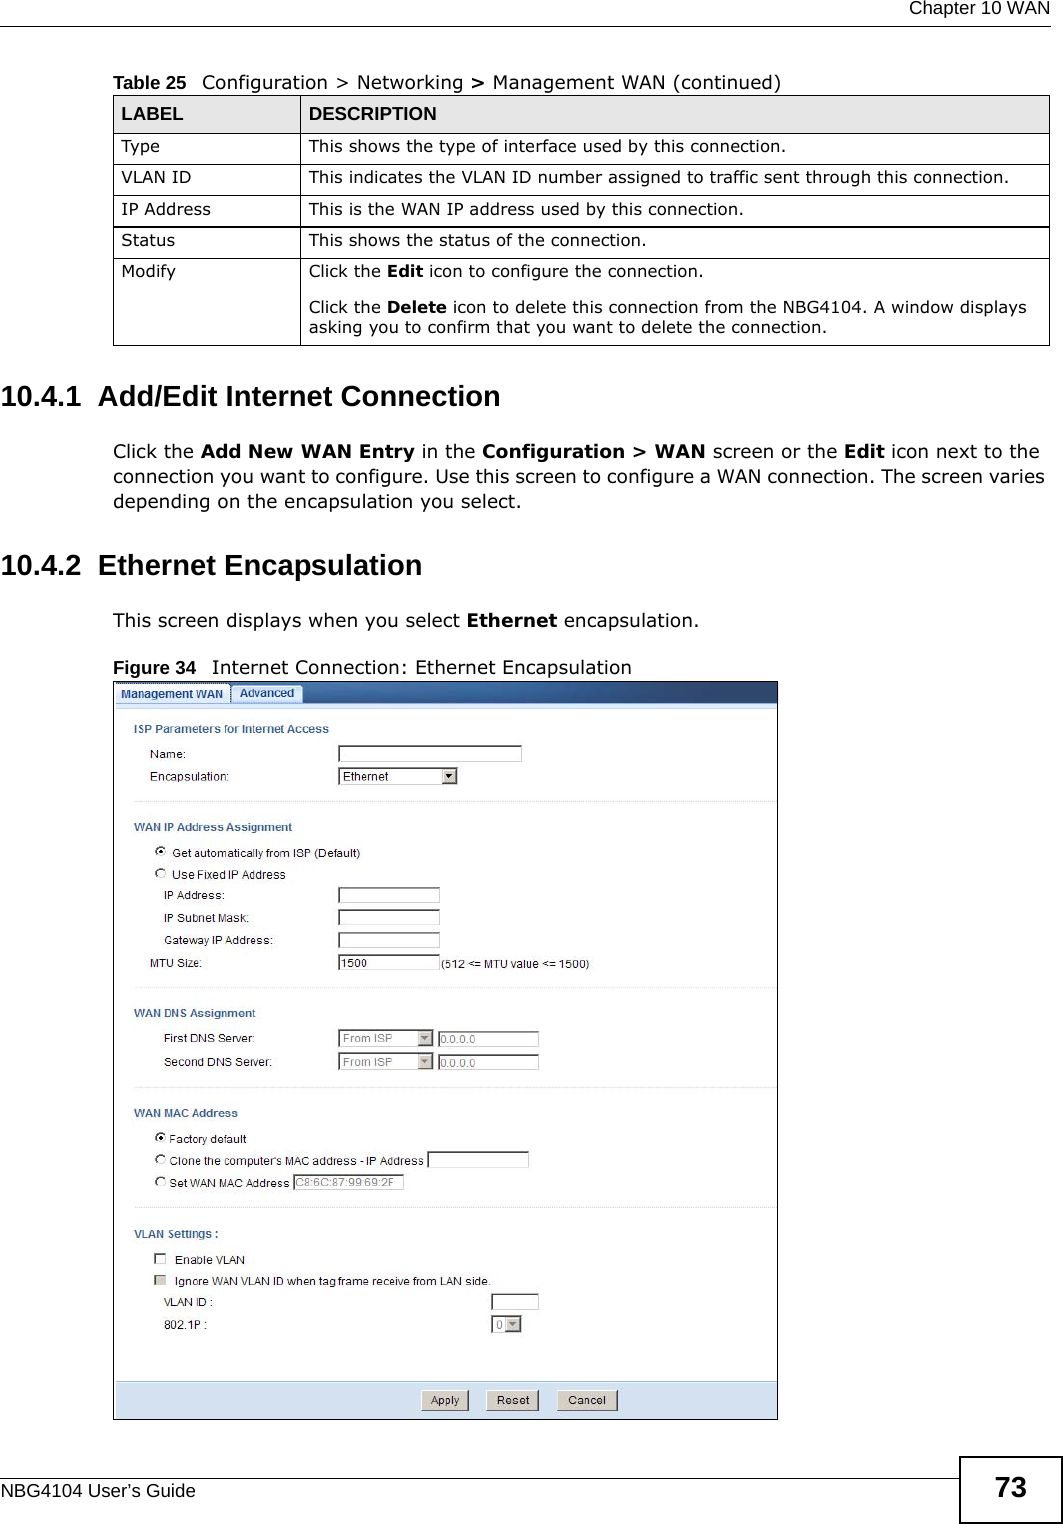  Chapter 10 WANNBG4104 User’s Guide 7310.4.1  Add/Edit Internet ConnectionClick the Add New WAN Entry in the Configuration &gt; WAN screen or the Edit icon next to the connection you want to configure. Use this screen to configure a WAN connection. The screen varies depending on the encapsulation you select.10.4.2  Ethernet EncapsulationThis screen displays when you select Ethernet encapsulation.Figure 34   Internet Connection: Ethernet EncapsulationType This shows the type of interface used by this connection.VLAN ID This indicates the VLAN ID number assigned to traffic sent through this connection.IP Address This is the WAN IP address used by this connection.Status This shows the status of the connection.Modify Click the Edit icon to configure the connection.Click the Delete icon to delete this connection from the NBG4104. A window displays asking you to confirm that you want to delete the connection.Table 25   Configuration &gt; Networking &gt; Management WAN (continued)LABEL DESCRIPTION